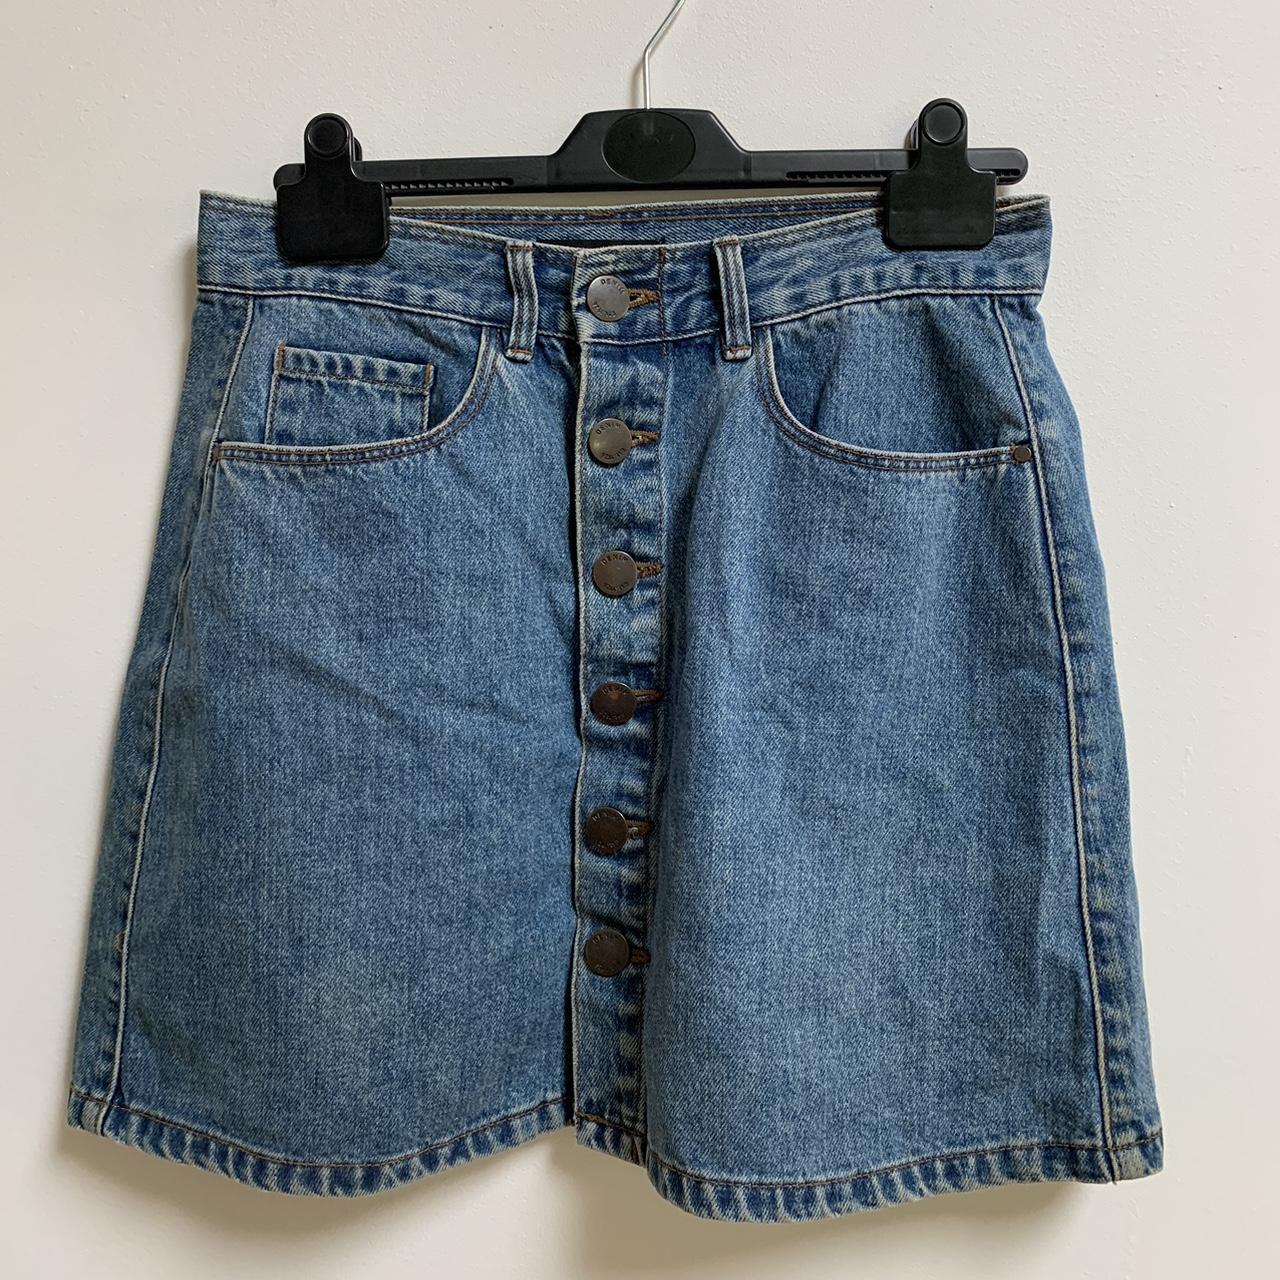 Denim button up skirt from Glassons size 10 - Depop